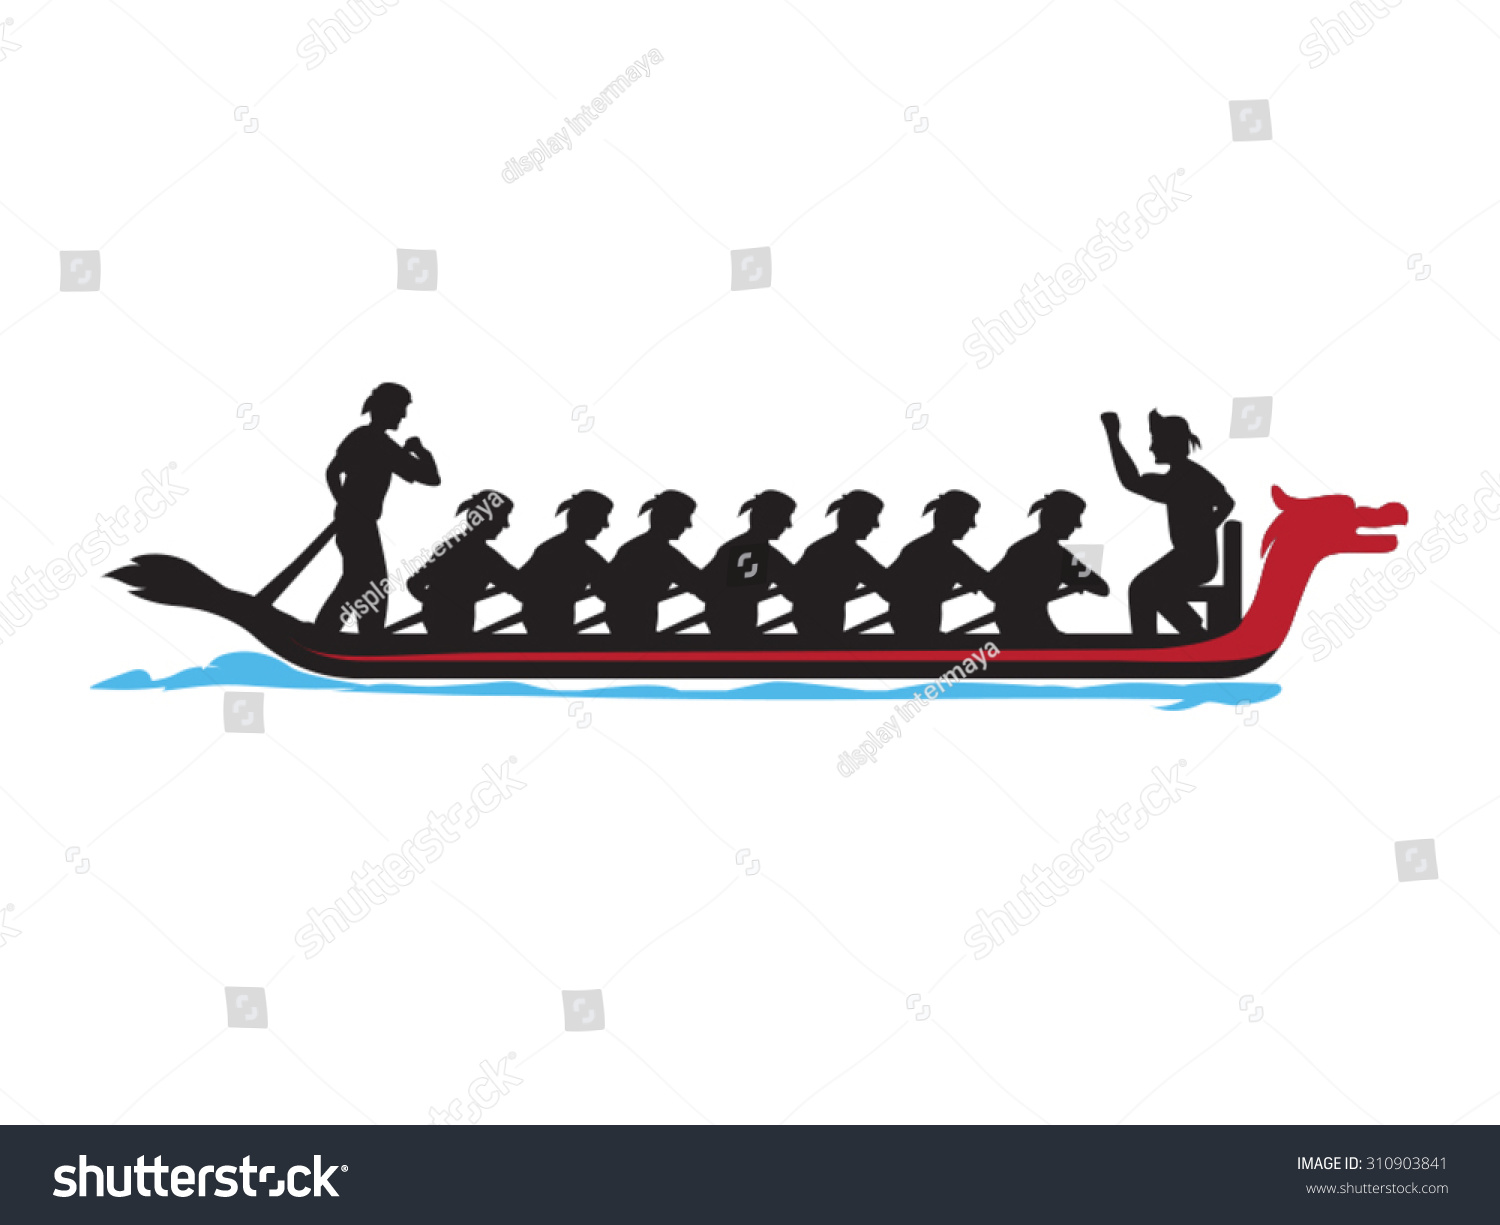 boat racing clipart - photo #21